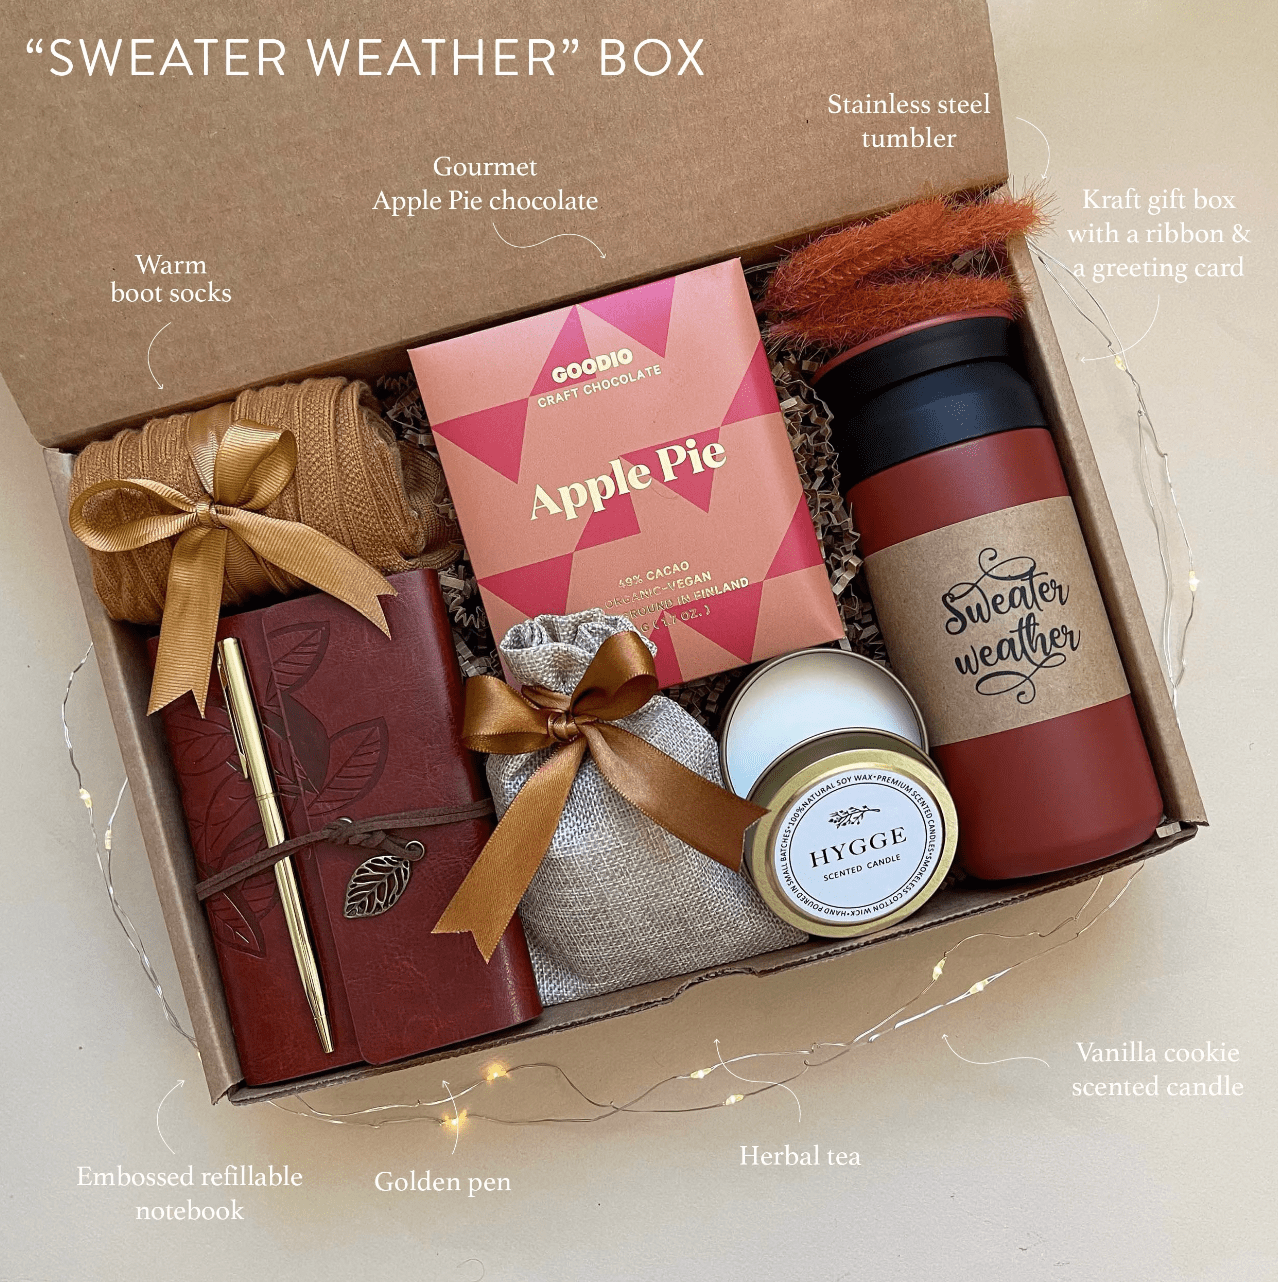 Cozy Care Package for Her & Him | Handmade Self Care Gift Box with Plaid  Blanket